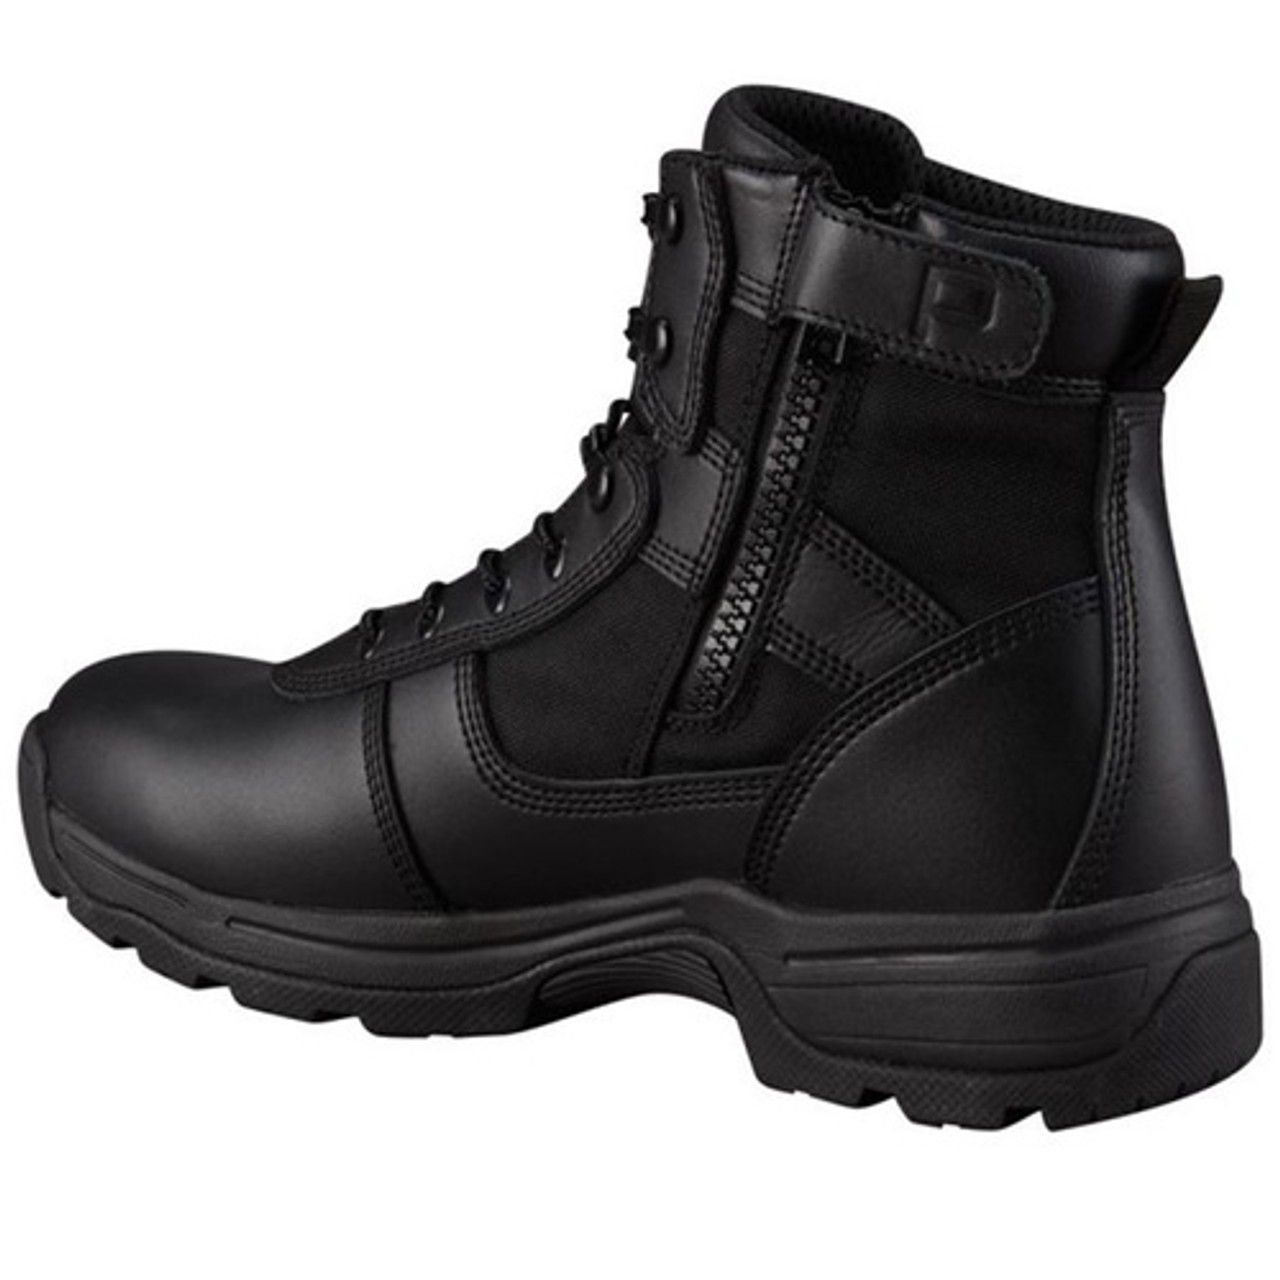 women's tactical boots with side zipper